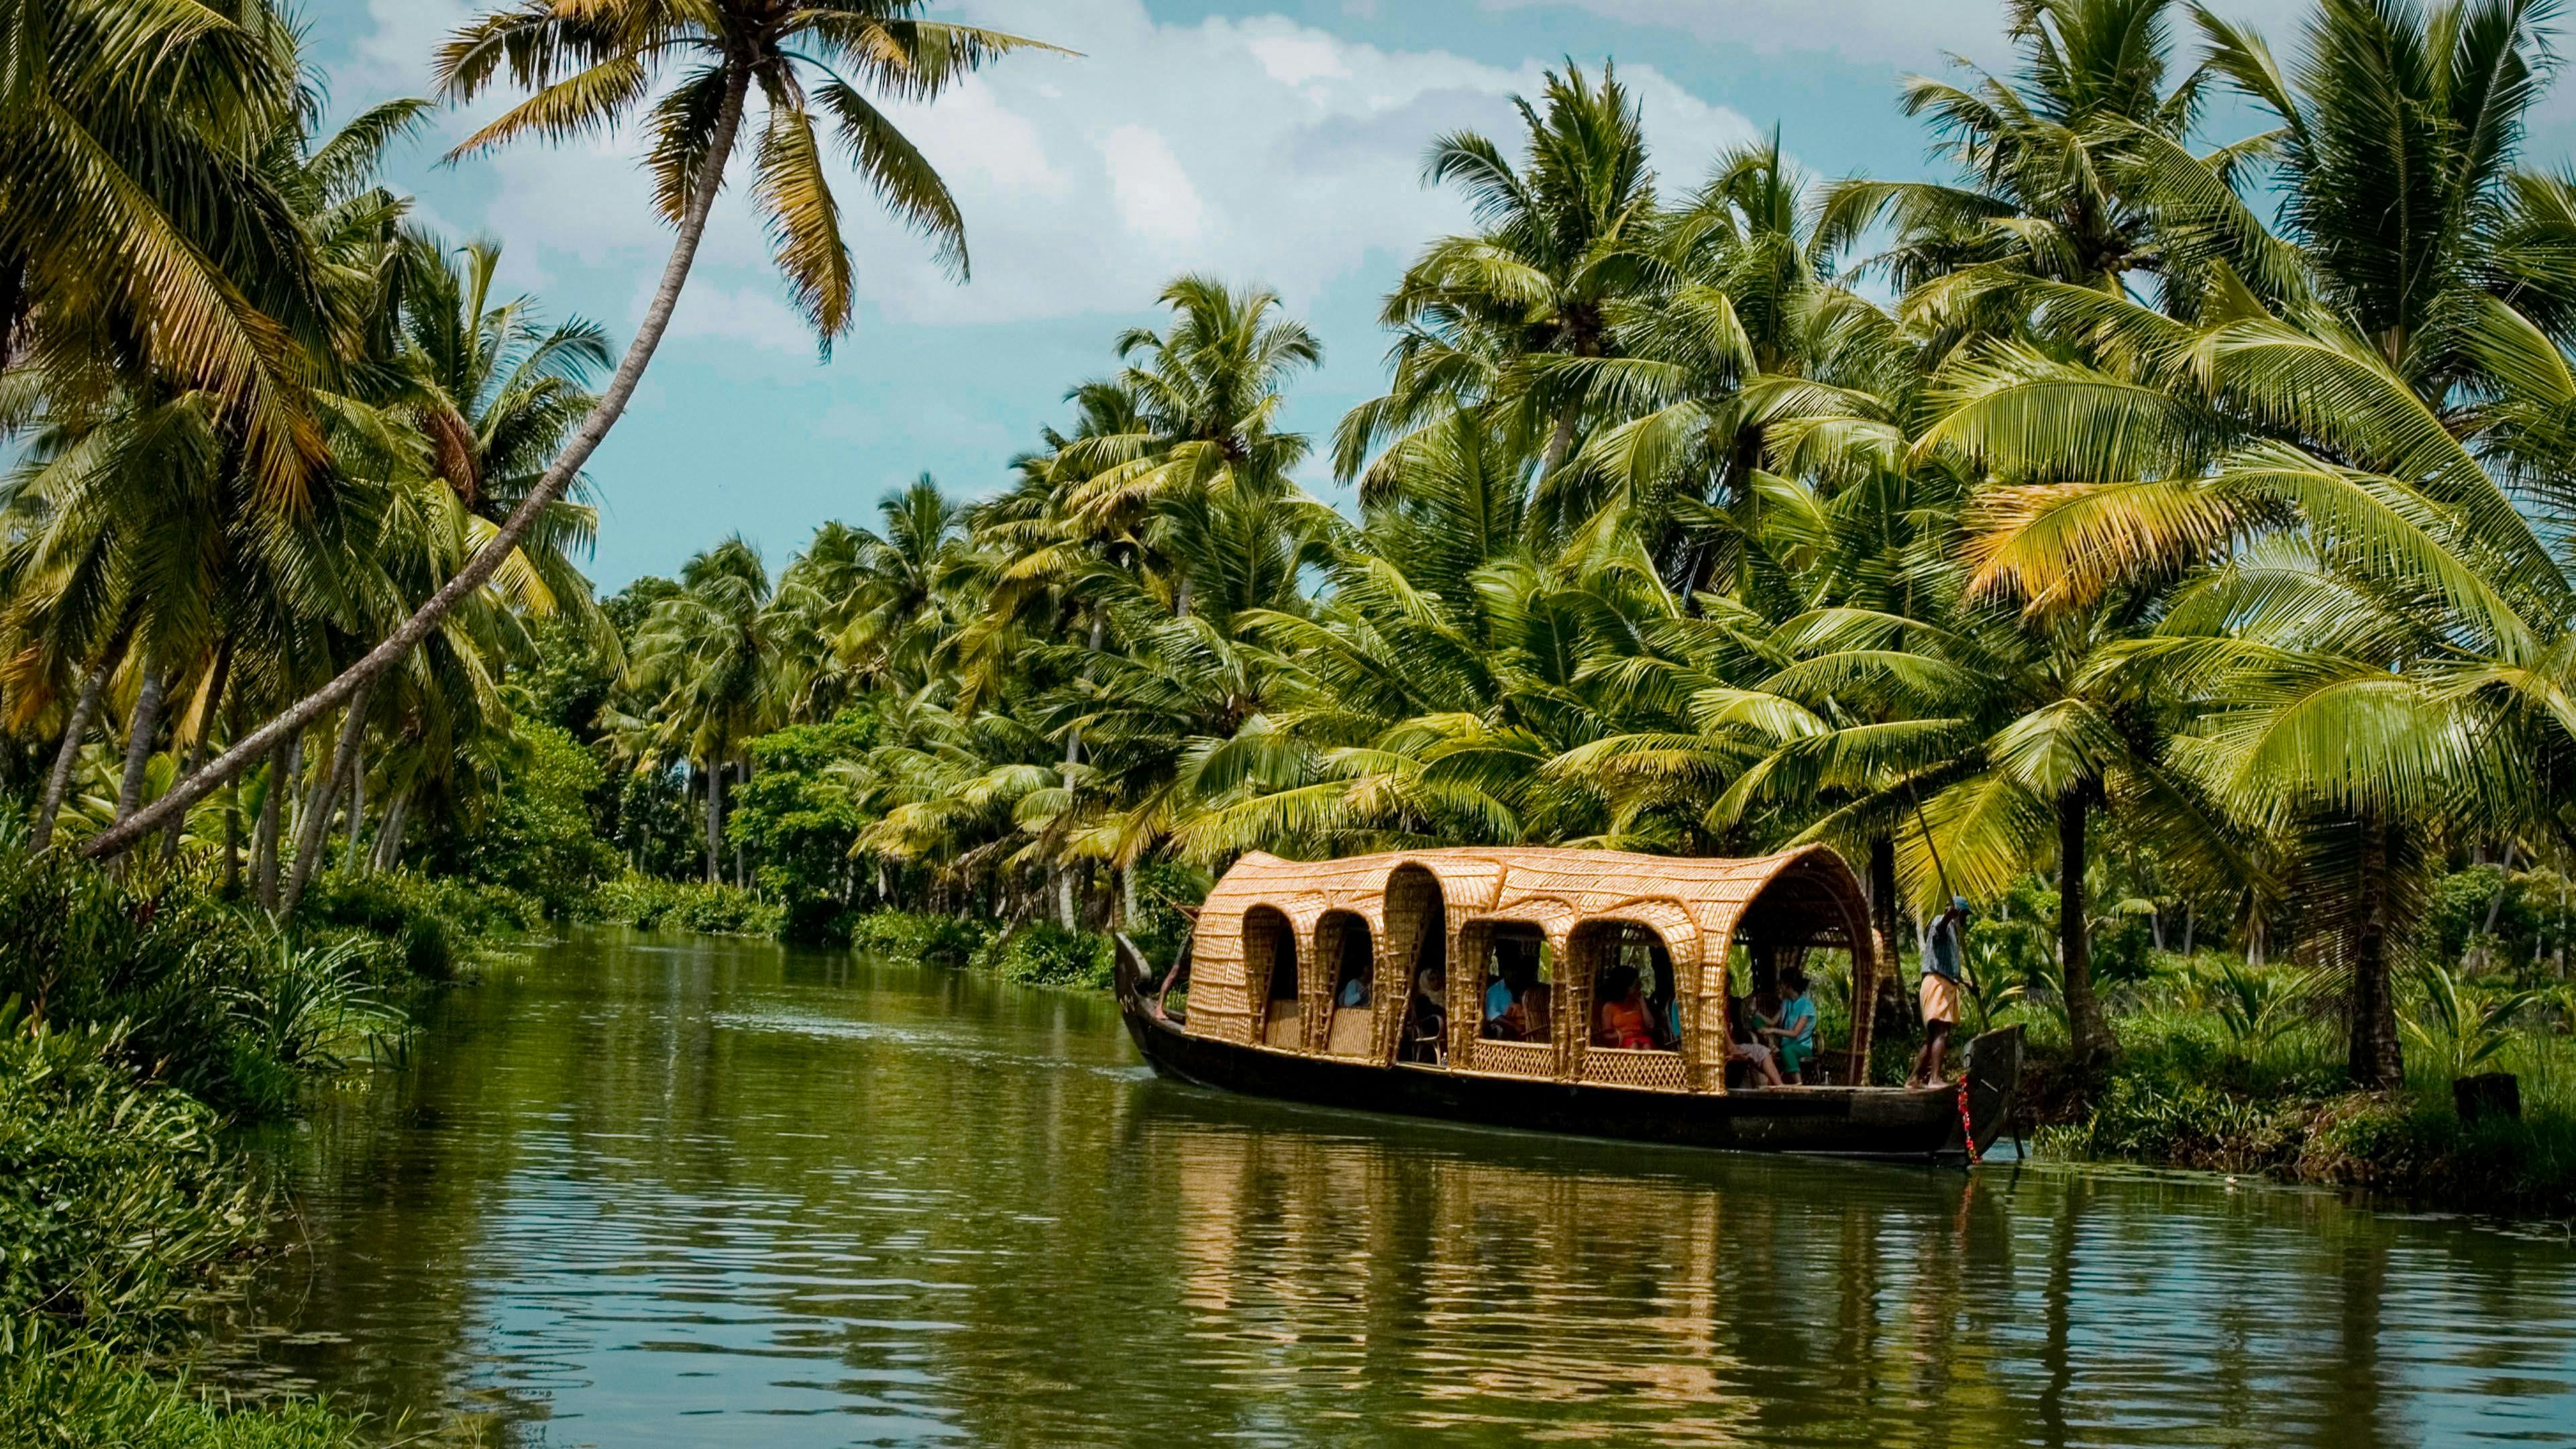 Kerala Featured in ‘New York Times’ in a List Of Best Destinations For 2023